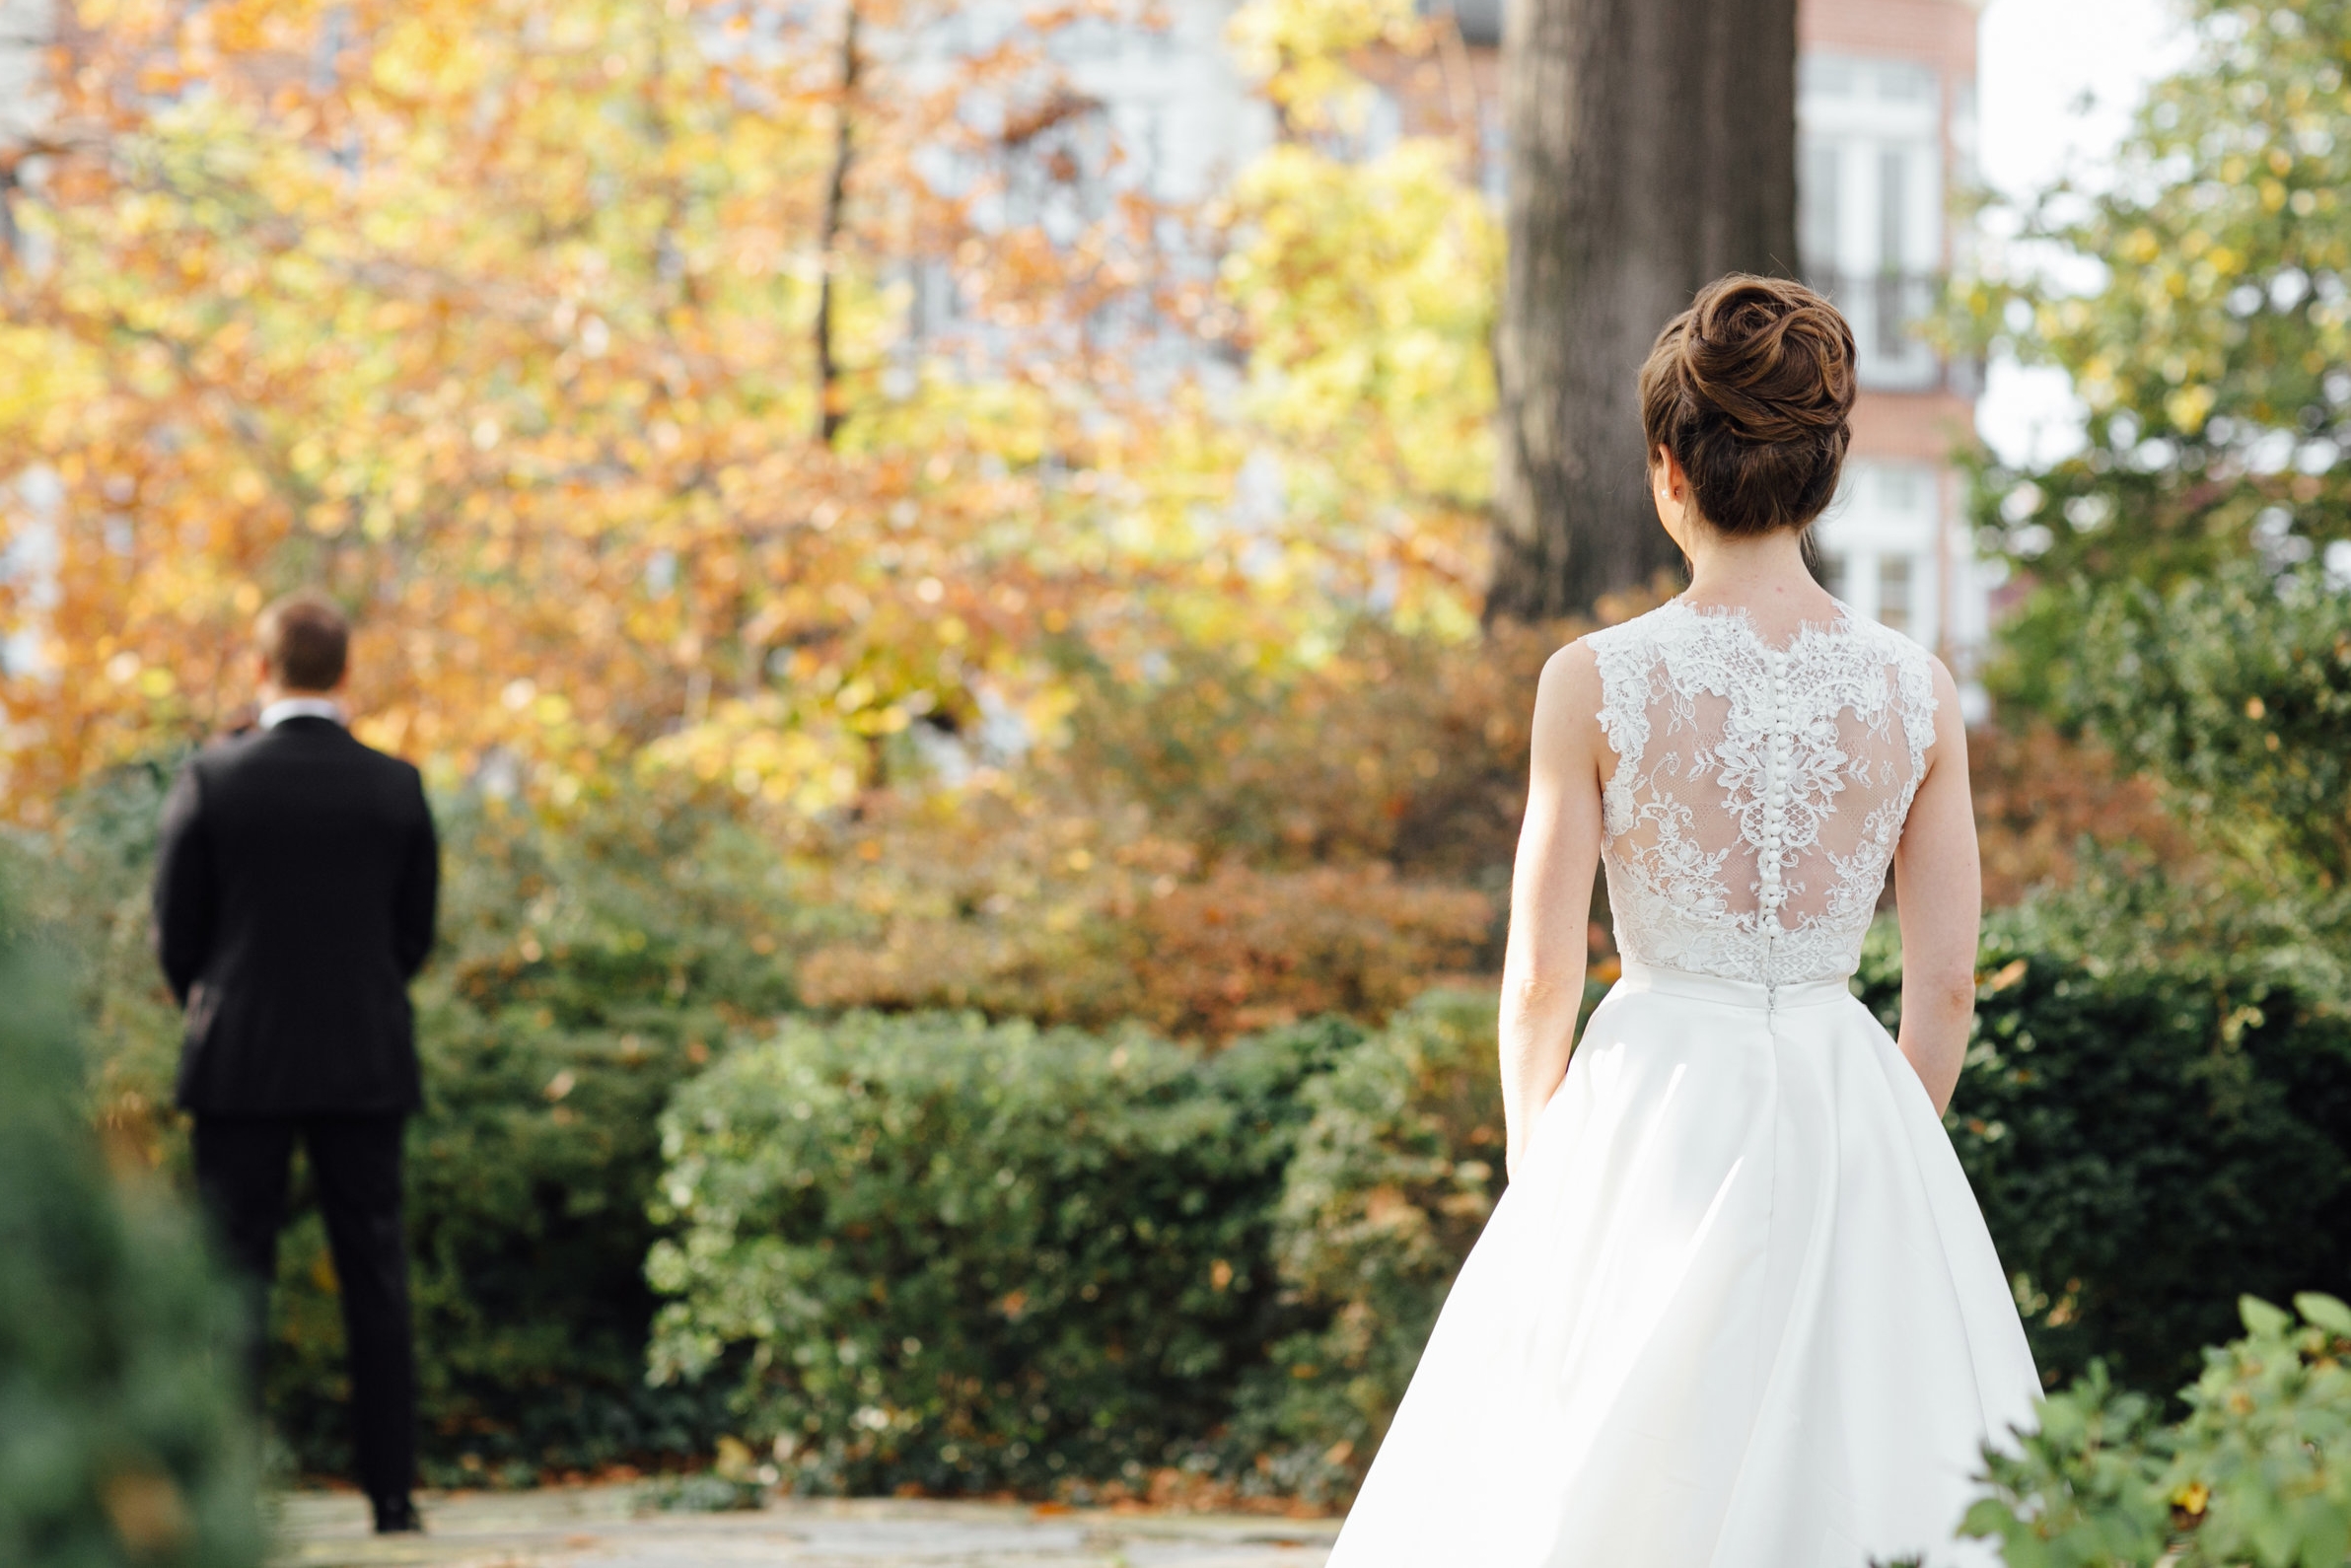 First Look with bride and groom at Meridian House in DC - Maria Vicencio Photography Weddings